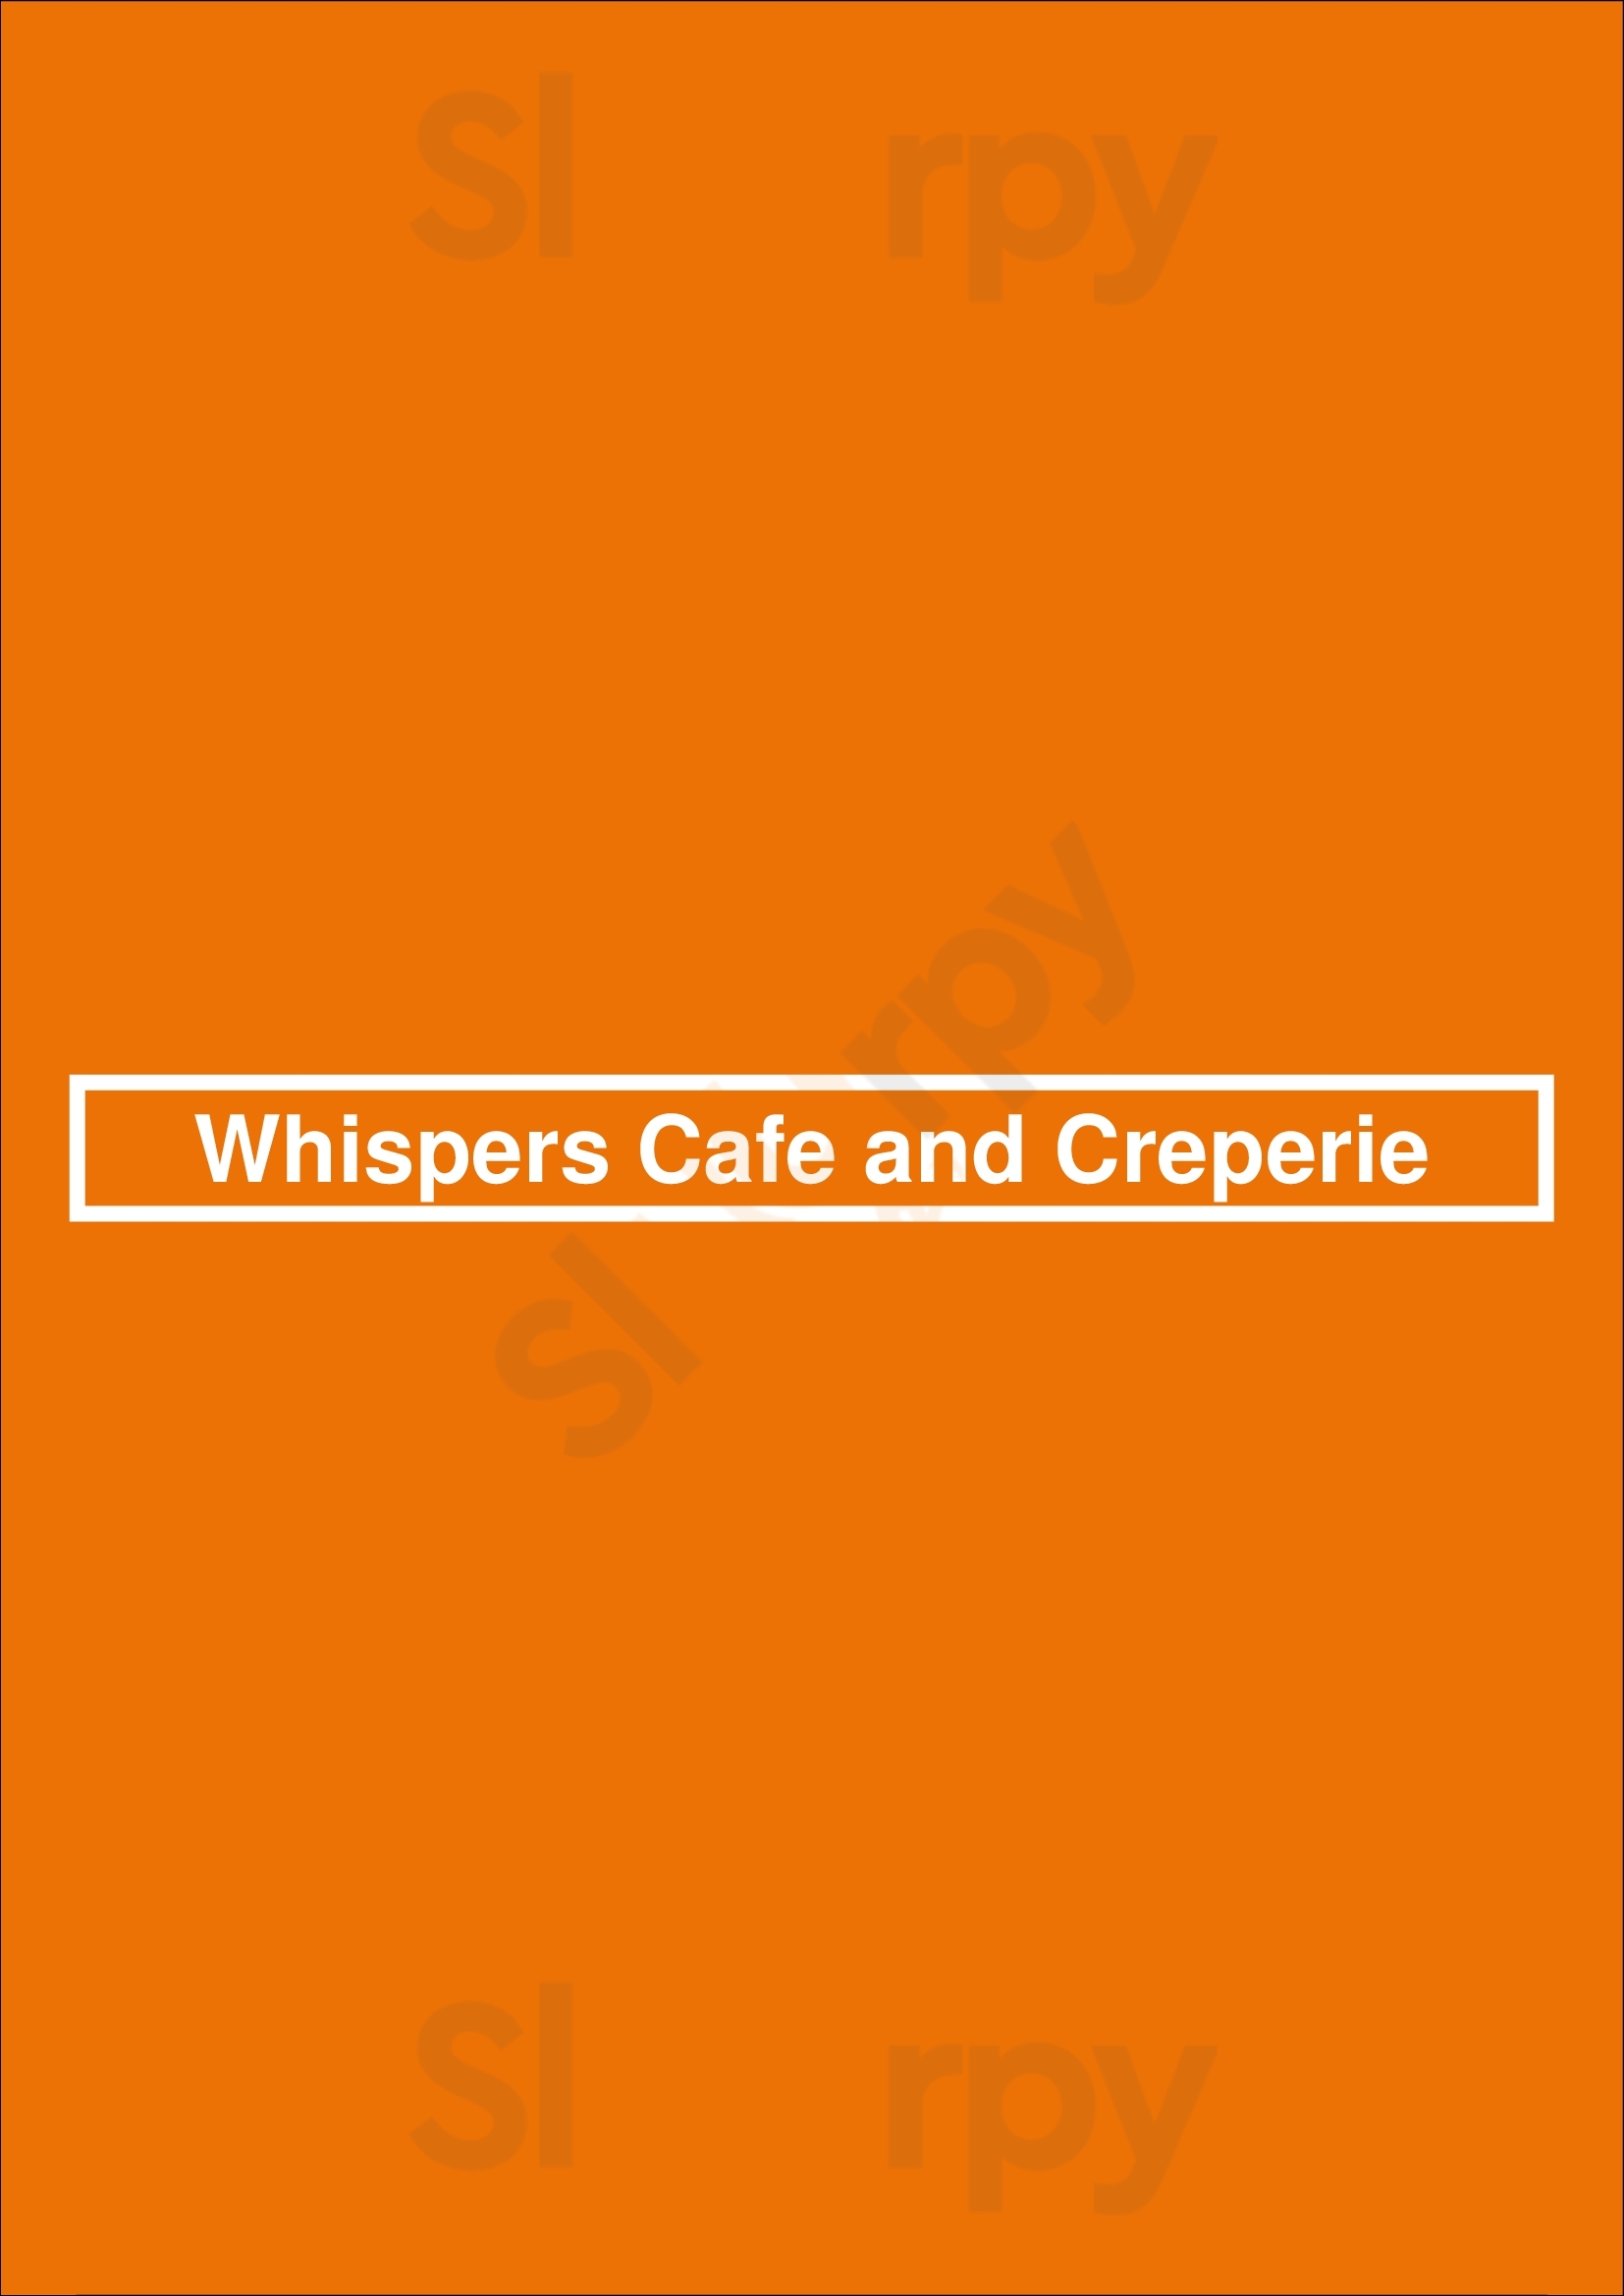 Whispers Cafe And Creperie San Jose Menu - 1